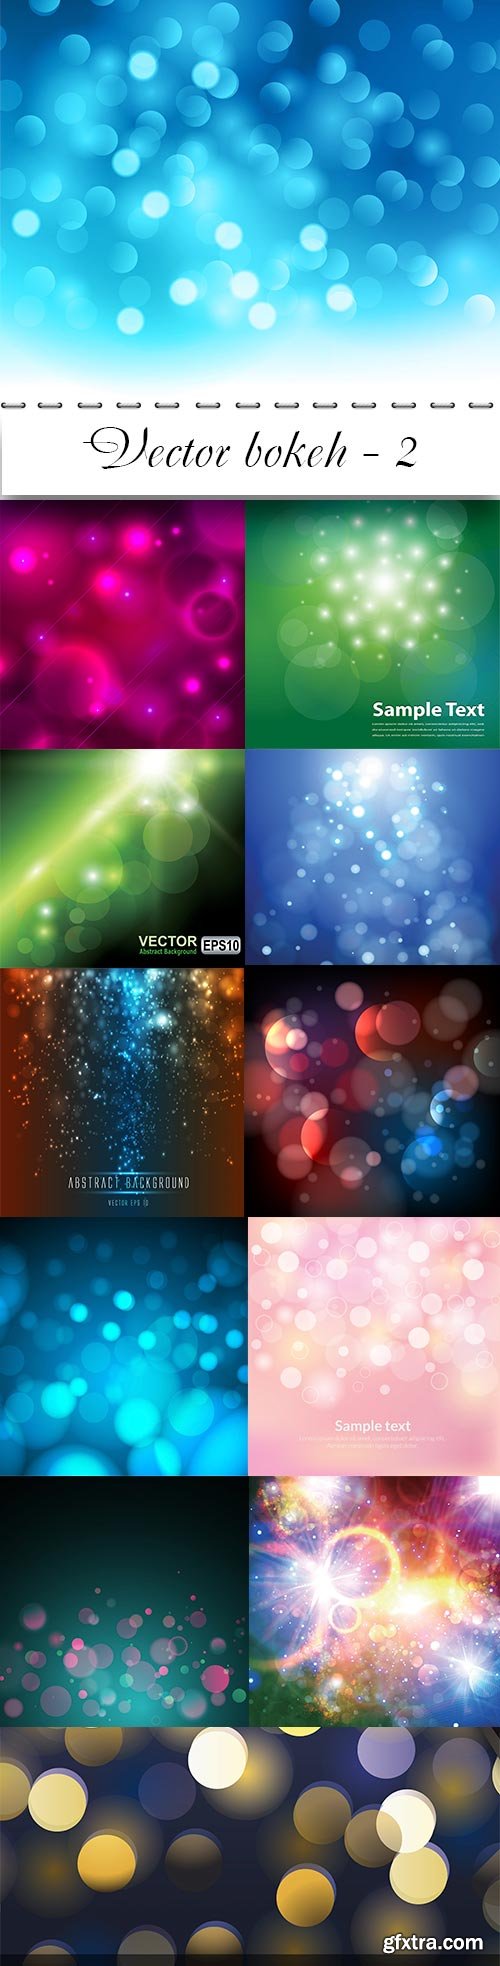 Vector bokeh colorful backgrounds - 2